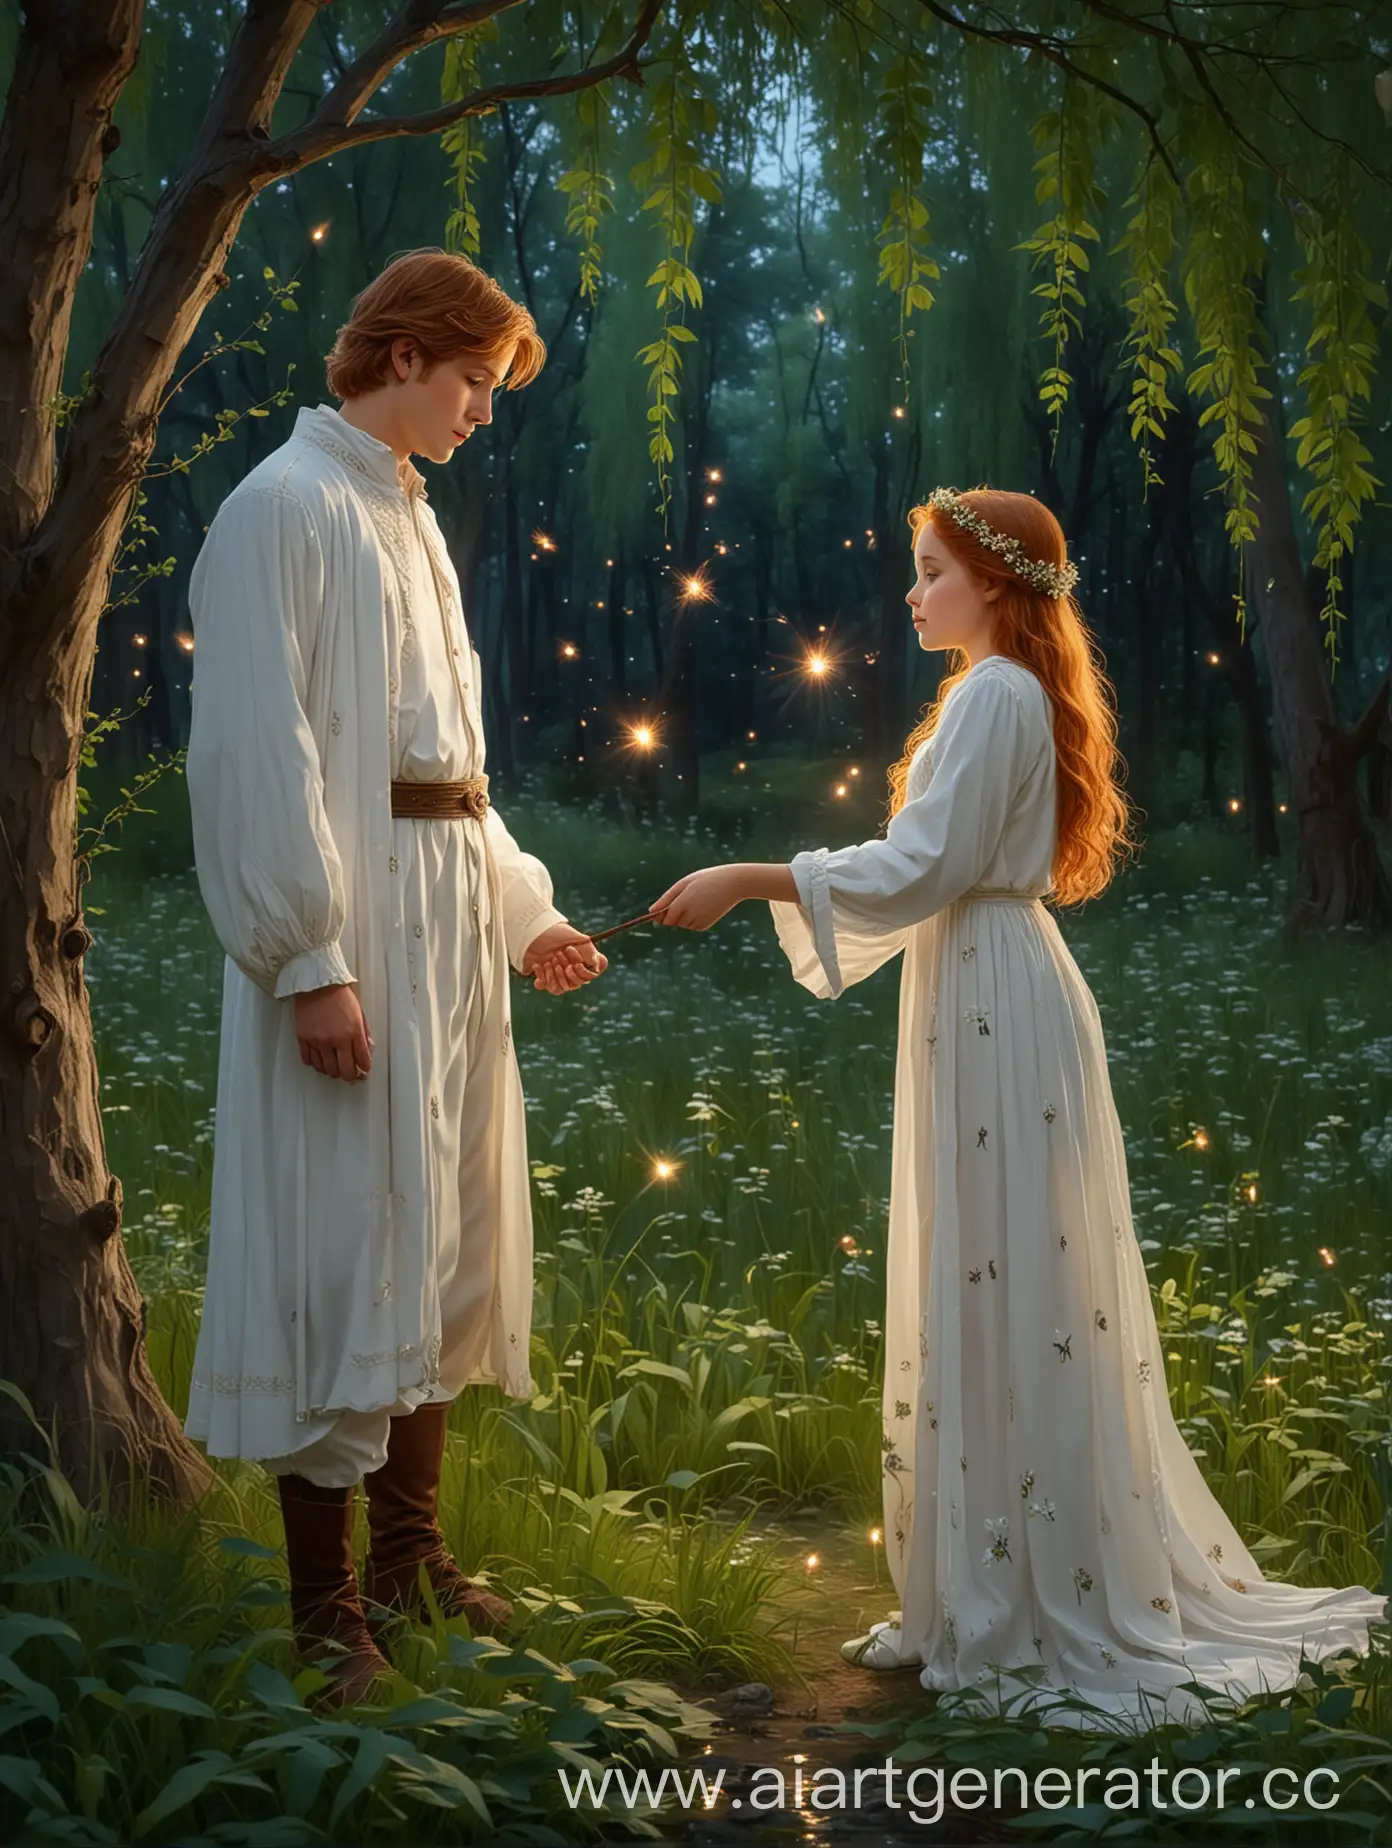 Enchanted-Evening-Forest-Prince-and-Princess-Under-Willow-with-Fireflies